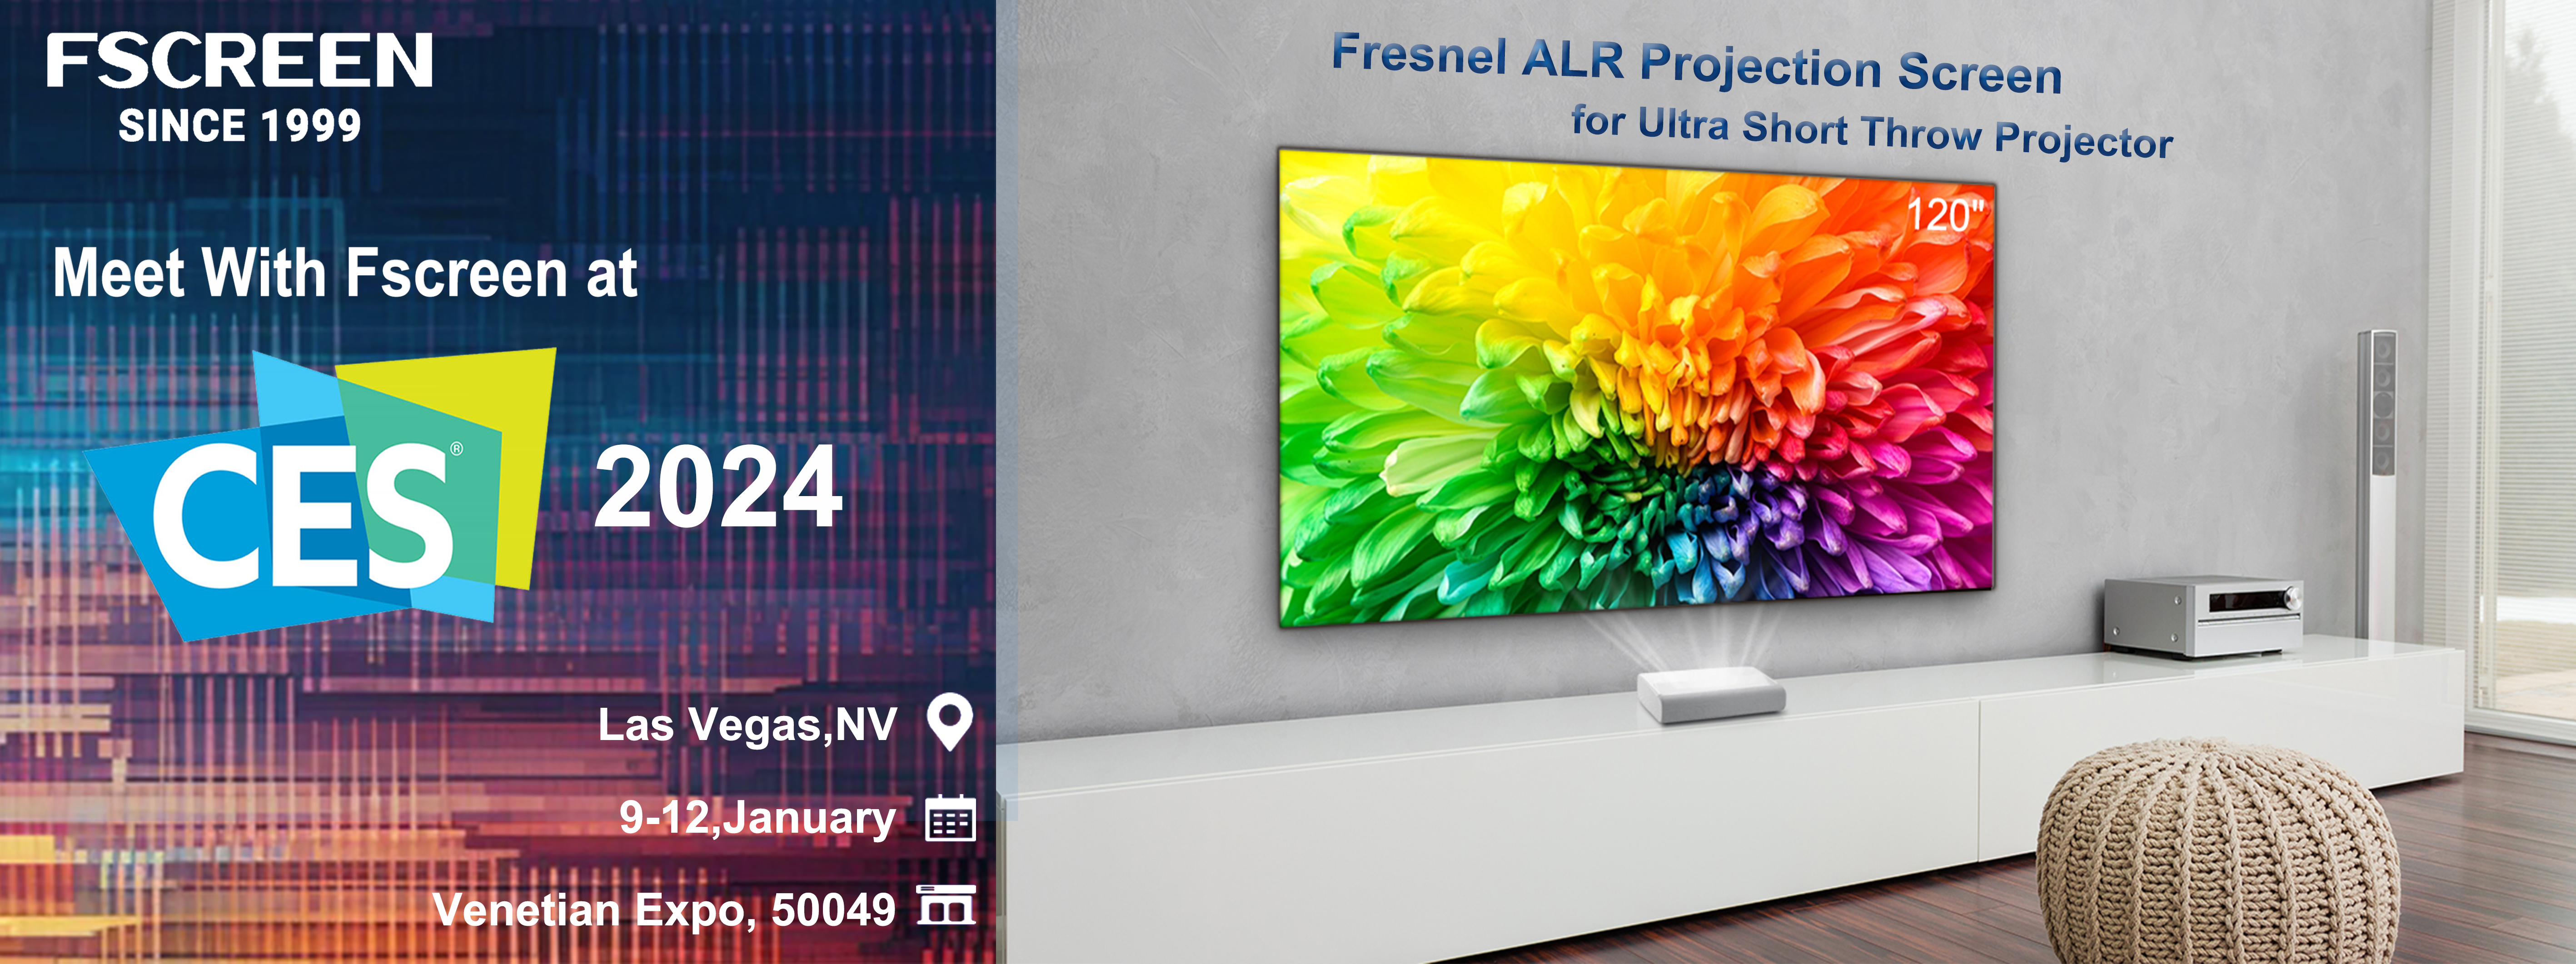 FSCREEN Take You on A Tour of CES 2024.120 Inch 8K Fresnel ALR Foldable UST Projection Screen